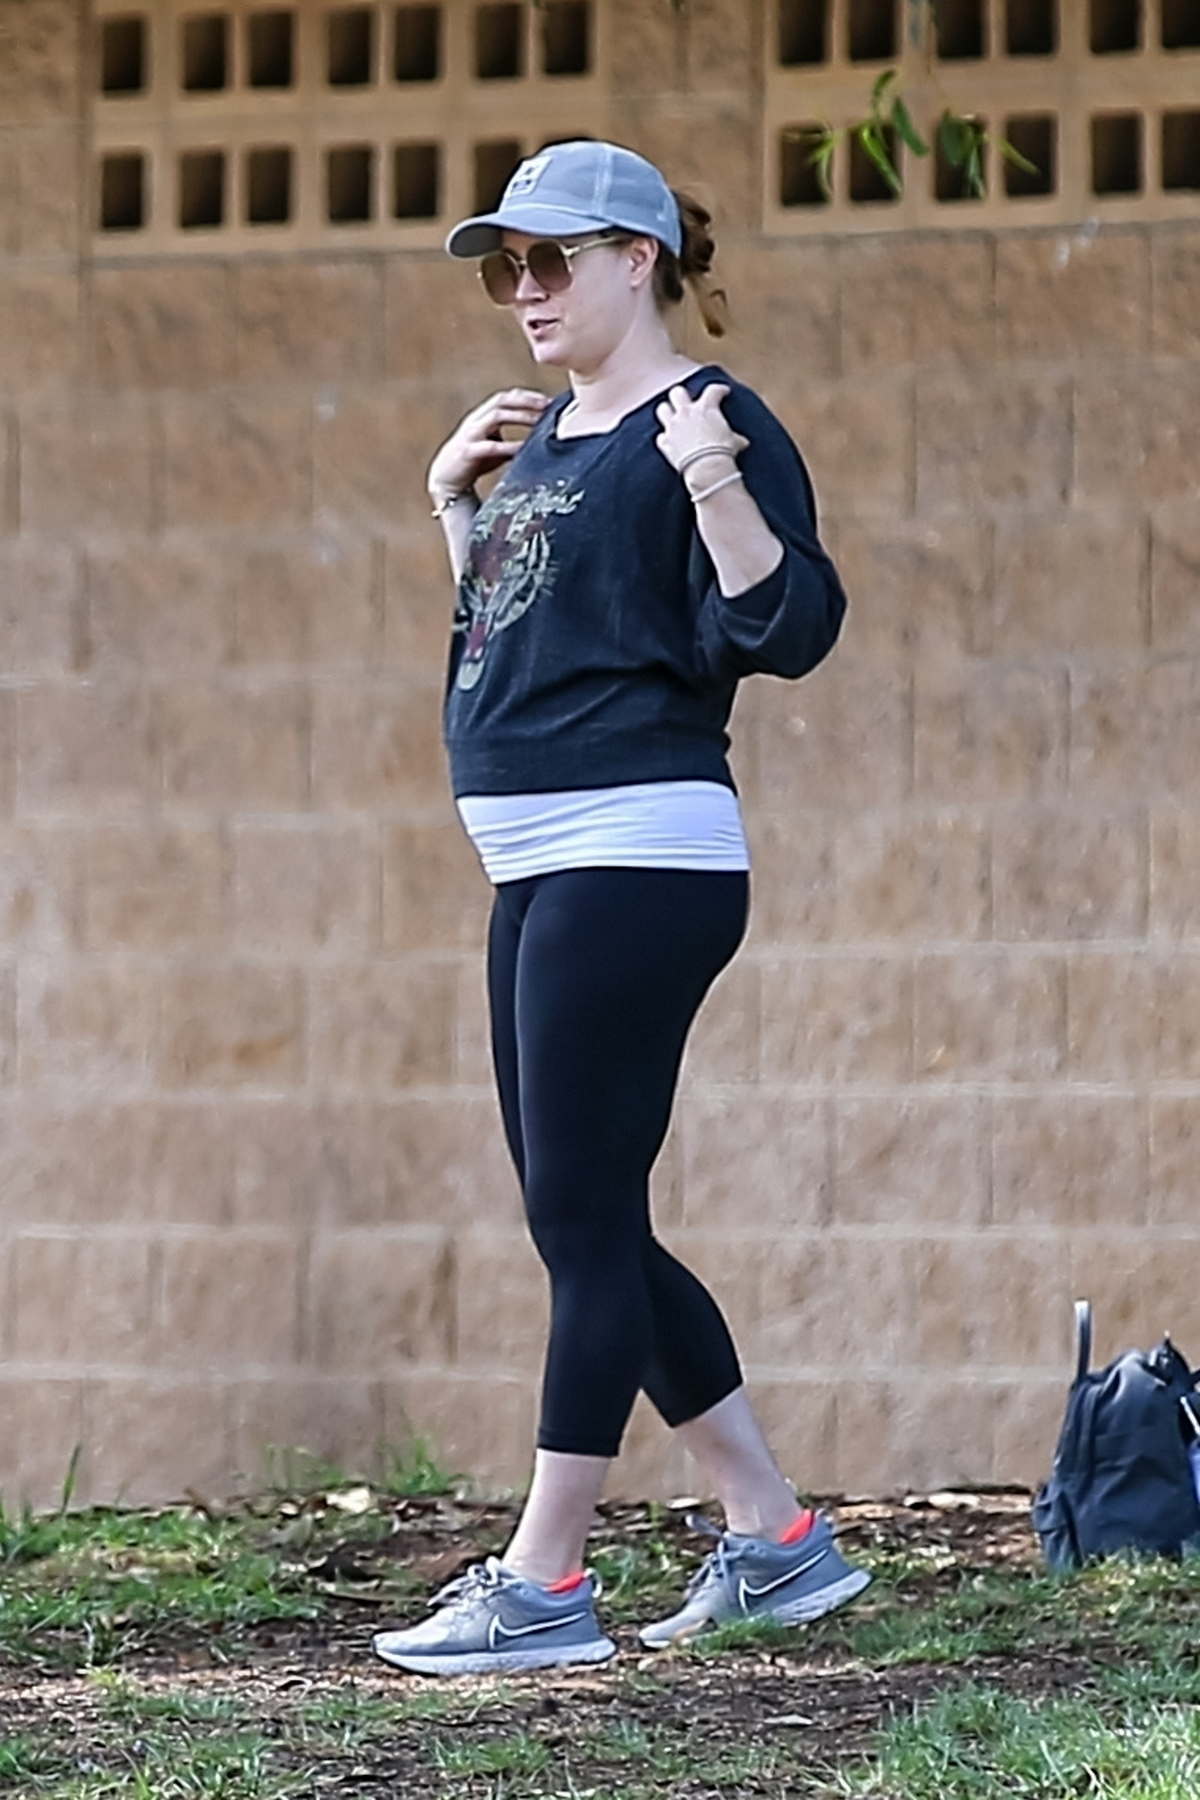 Amy Adams keeps it casual in a black top and leggings while at her